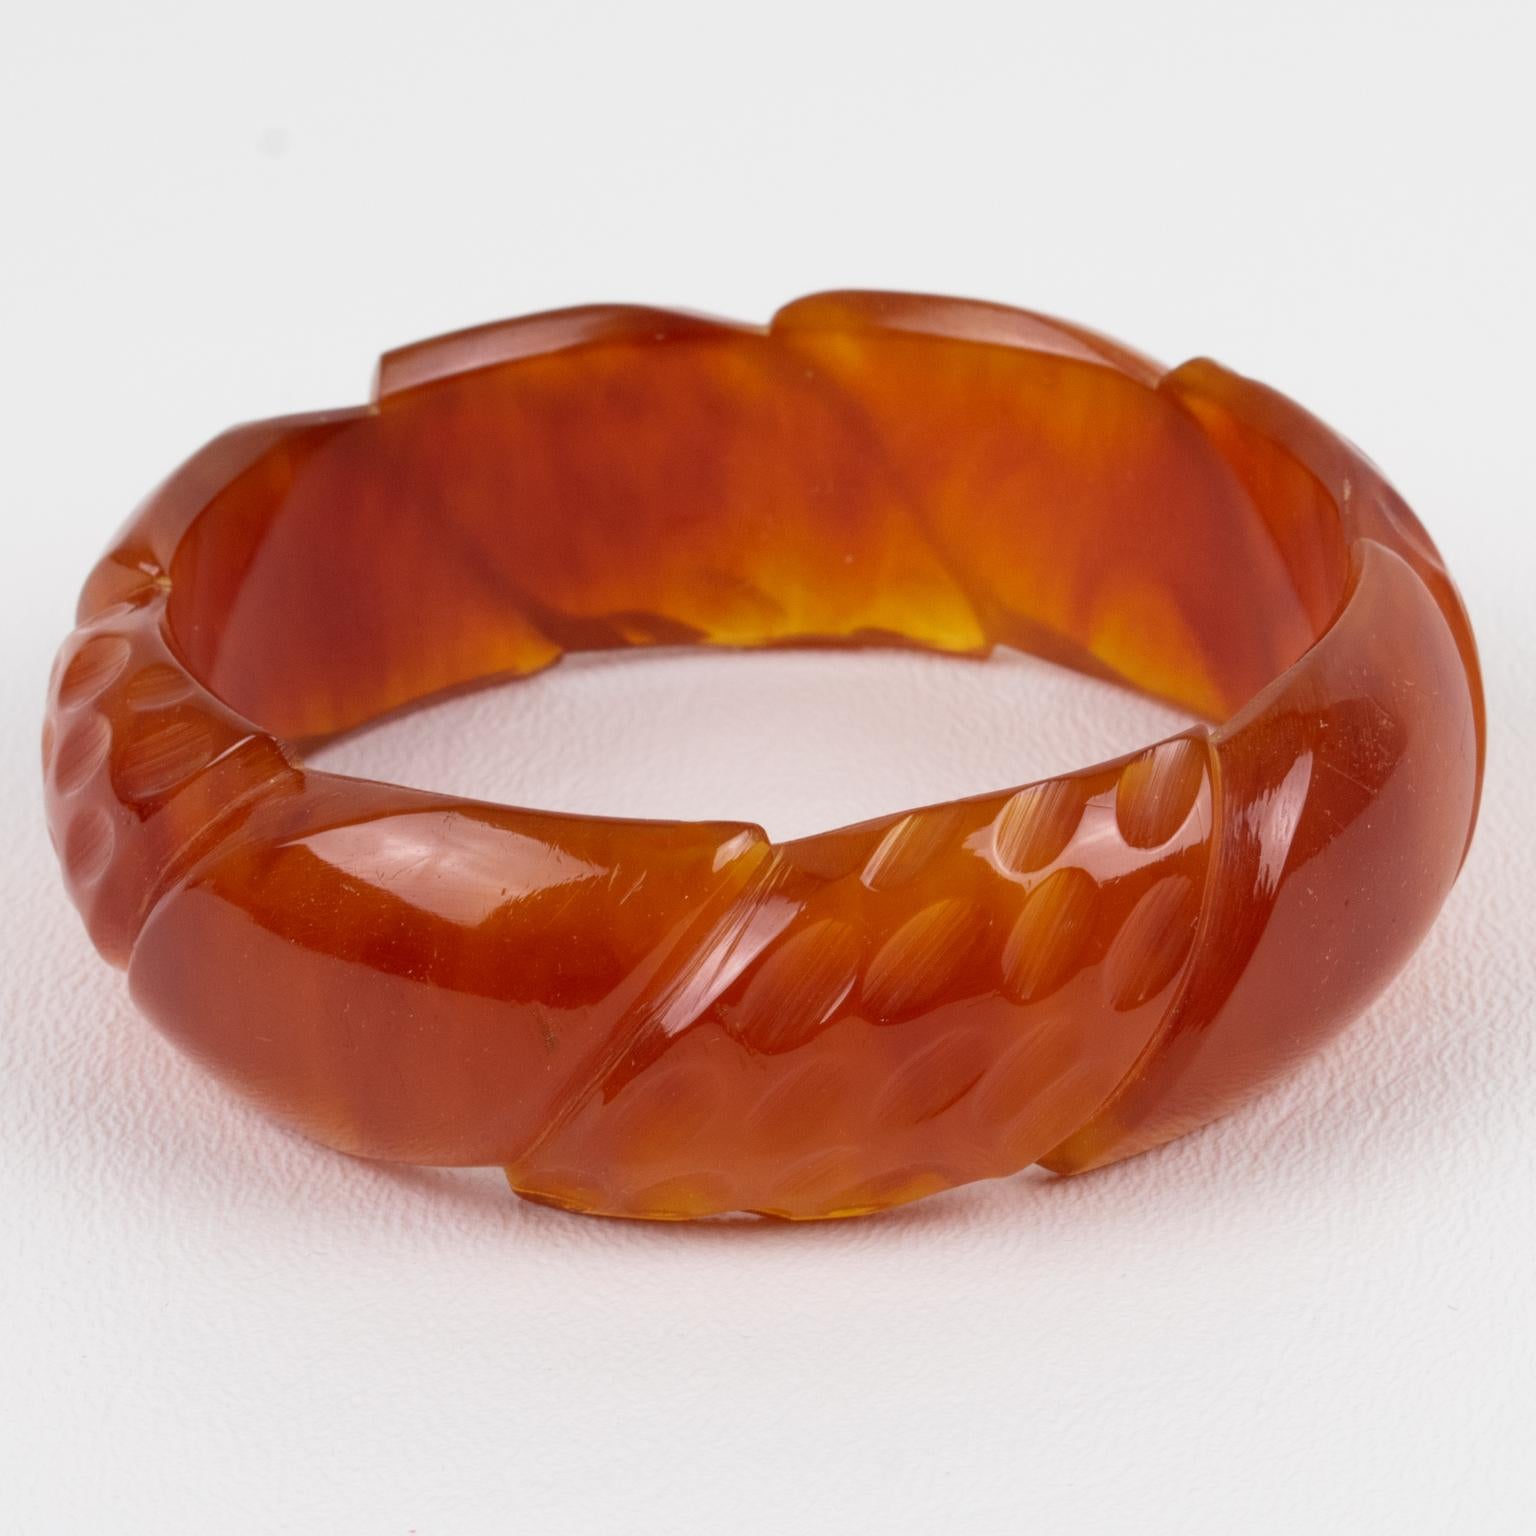 This is a gorgeous red tea amber marble Bakelite carved bracelet bangle. It features a chunky domed shape with deep geometric carving all around. The color is an intense amber marble tone with red tea cloudy swirling and some transparency.
The